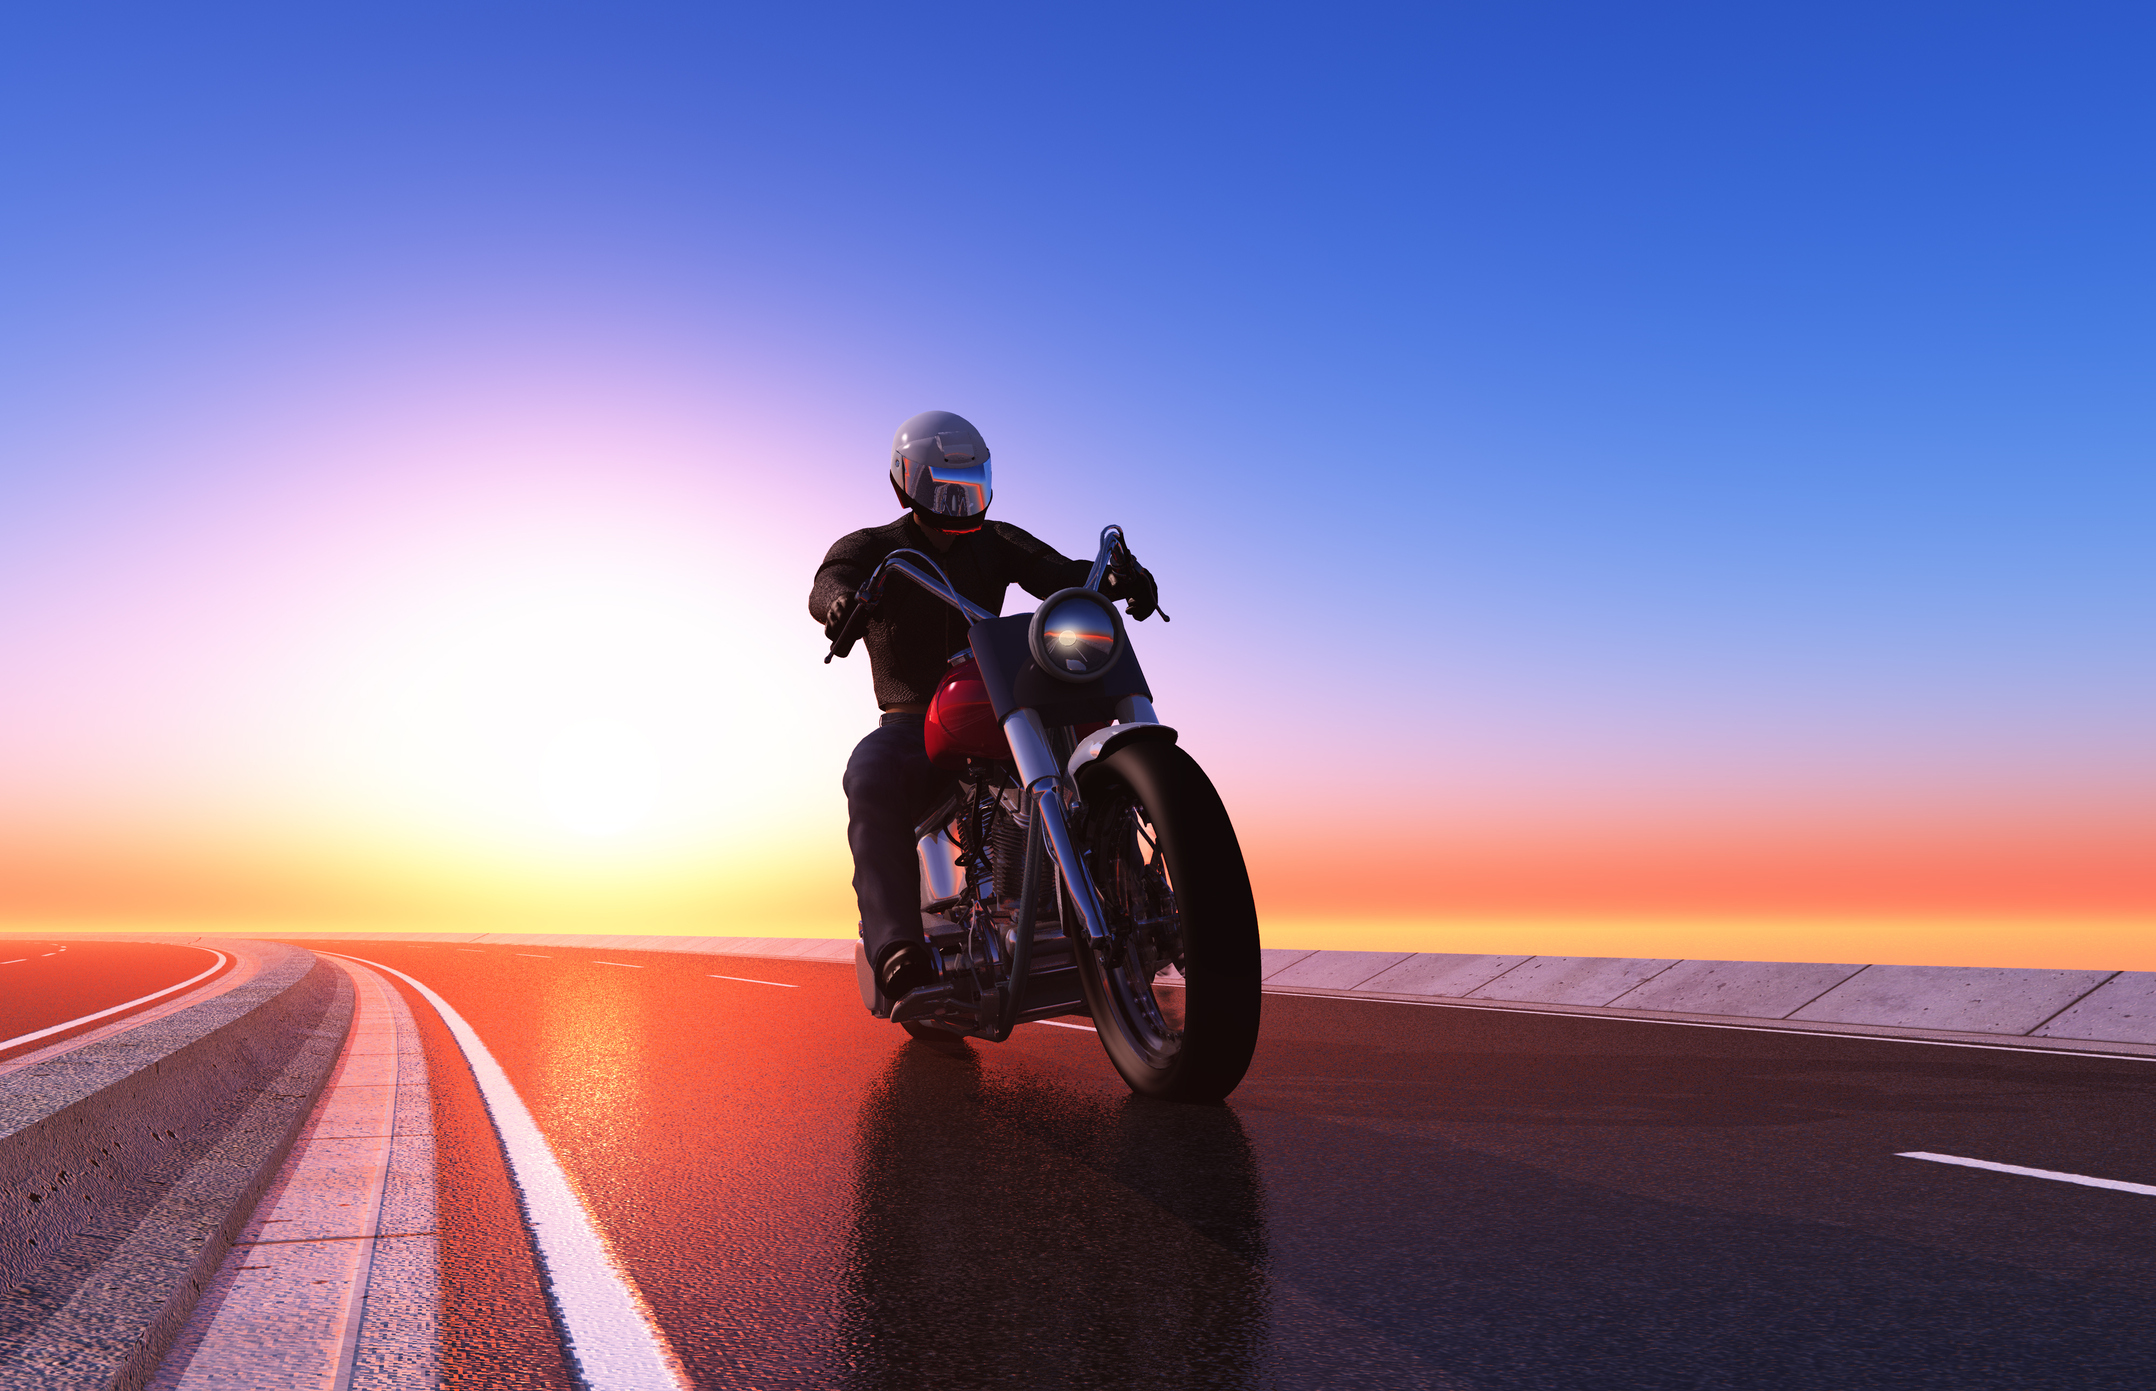 A motorcyclist riding at sunset